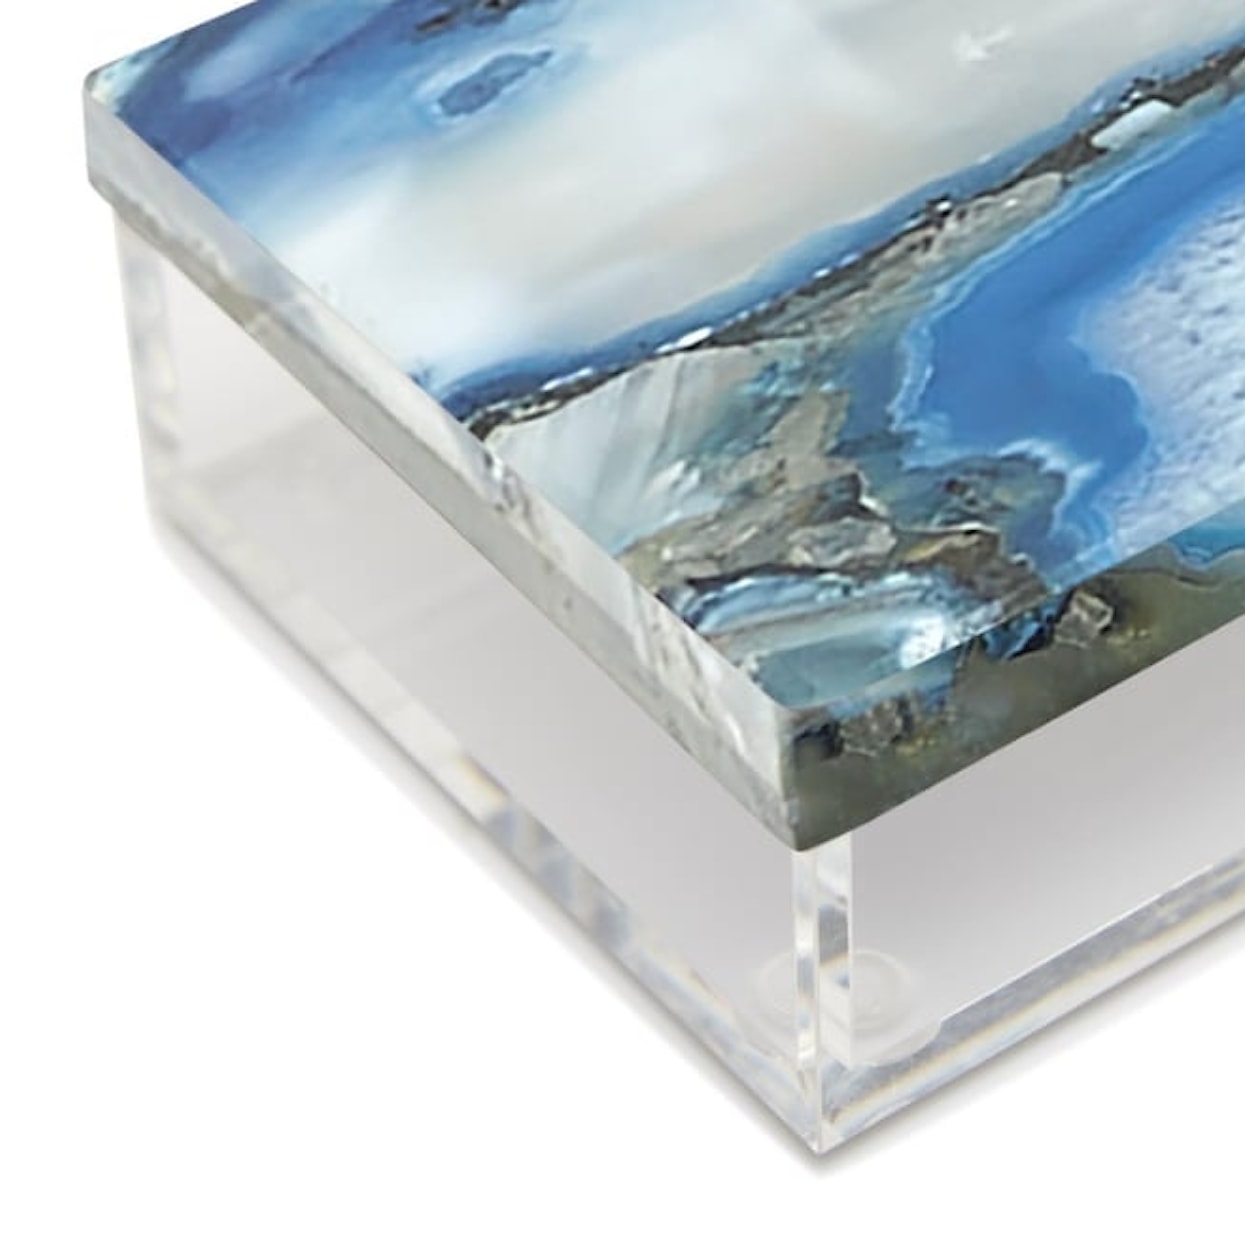 Two's Company Urban Nest Set of 2 Blue Agate Boxes